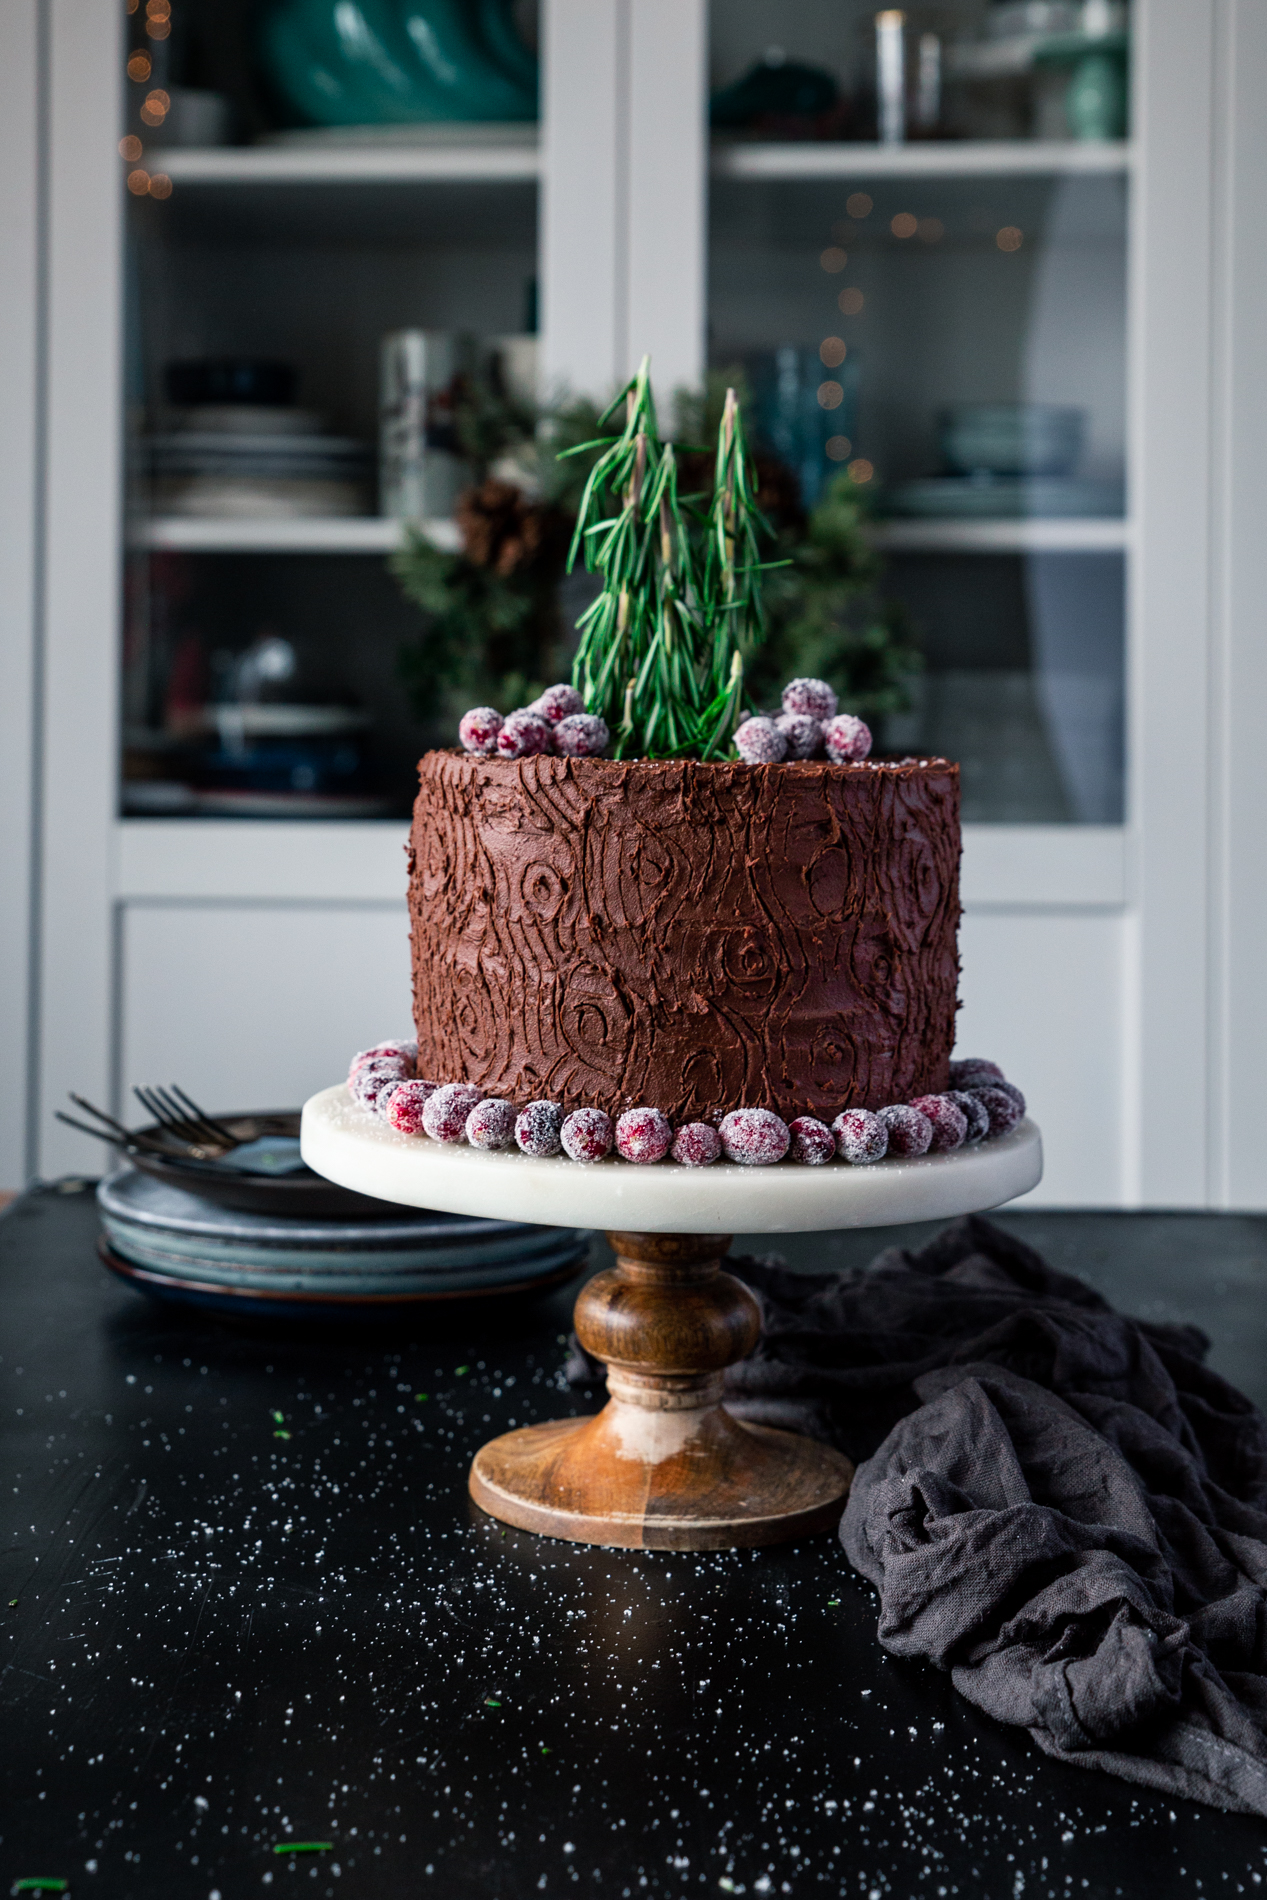 straight-forward view of a chocolate cake on a cake stand with a tree stump design, surrounded by sugared cranberries, with sugared cranberries on top and rosemary sprigs acting as trees.